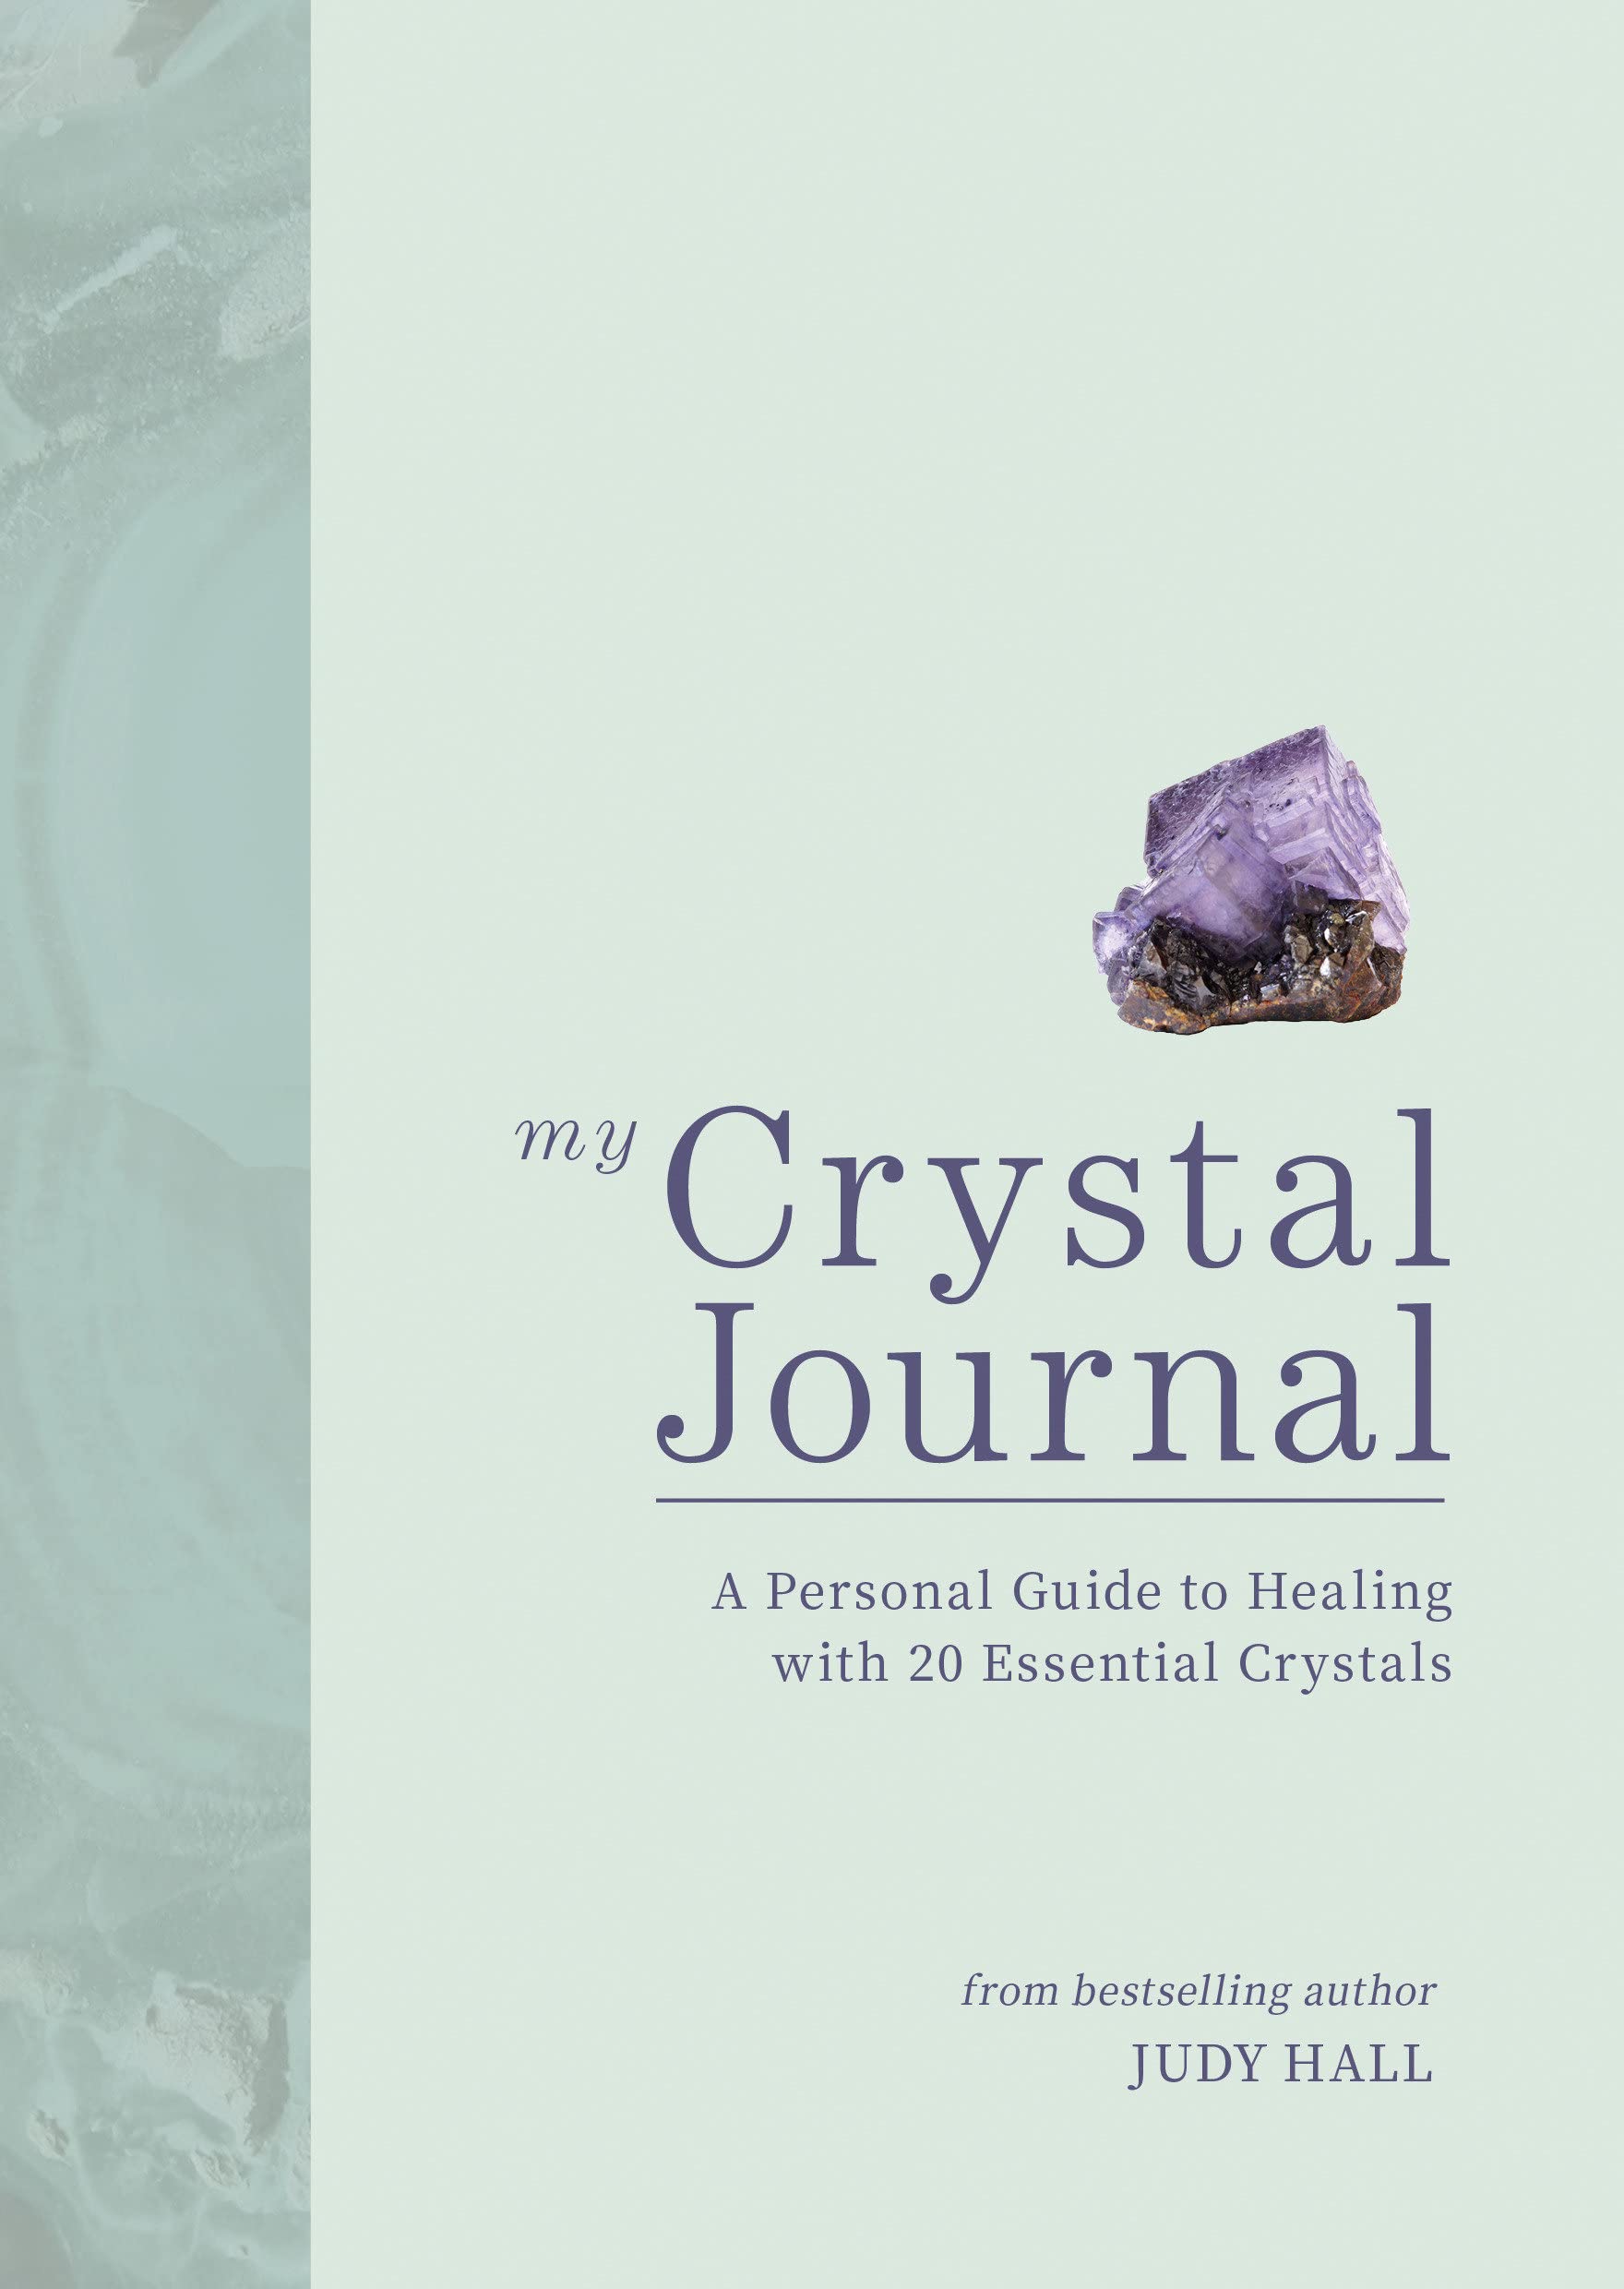 My Crystal Journal: A Personal Guide to Healing with 20 Essential Crystals || Judy Hall (Paperback)